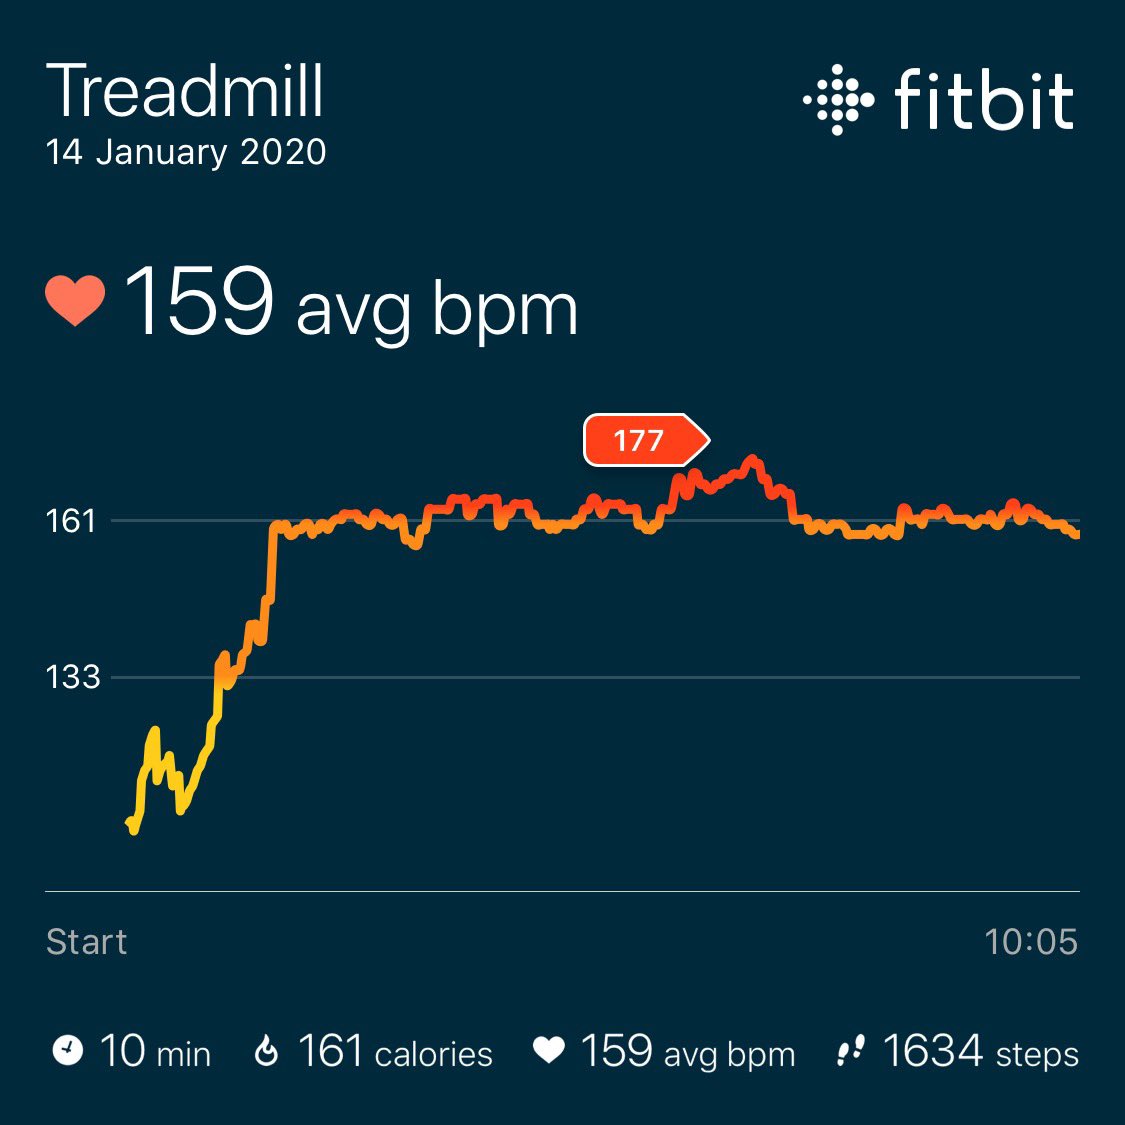 RED January - Day 14

I ain’t running outside in this weather... signed up to the gym at work and had my first treadmill run in about 9 months. Knee injury is still giving me some issues but it’s getting better by the day! 
#redjanuary2020 #running #exercise #treadmillrunning